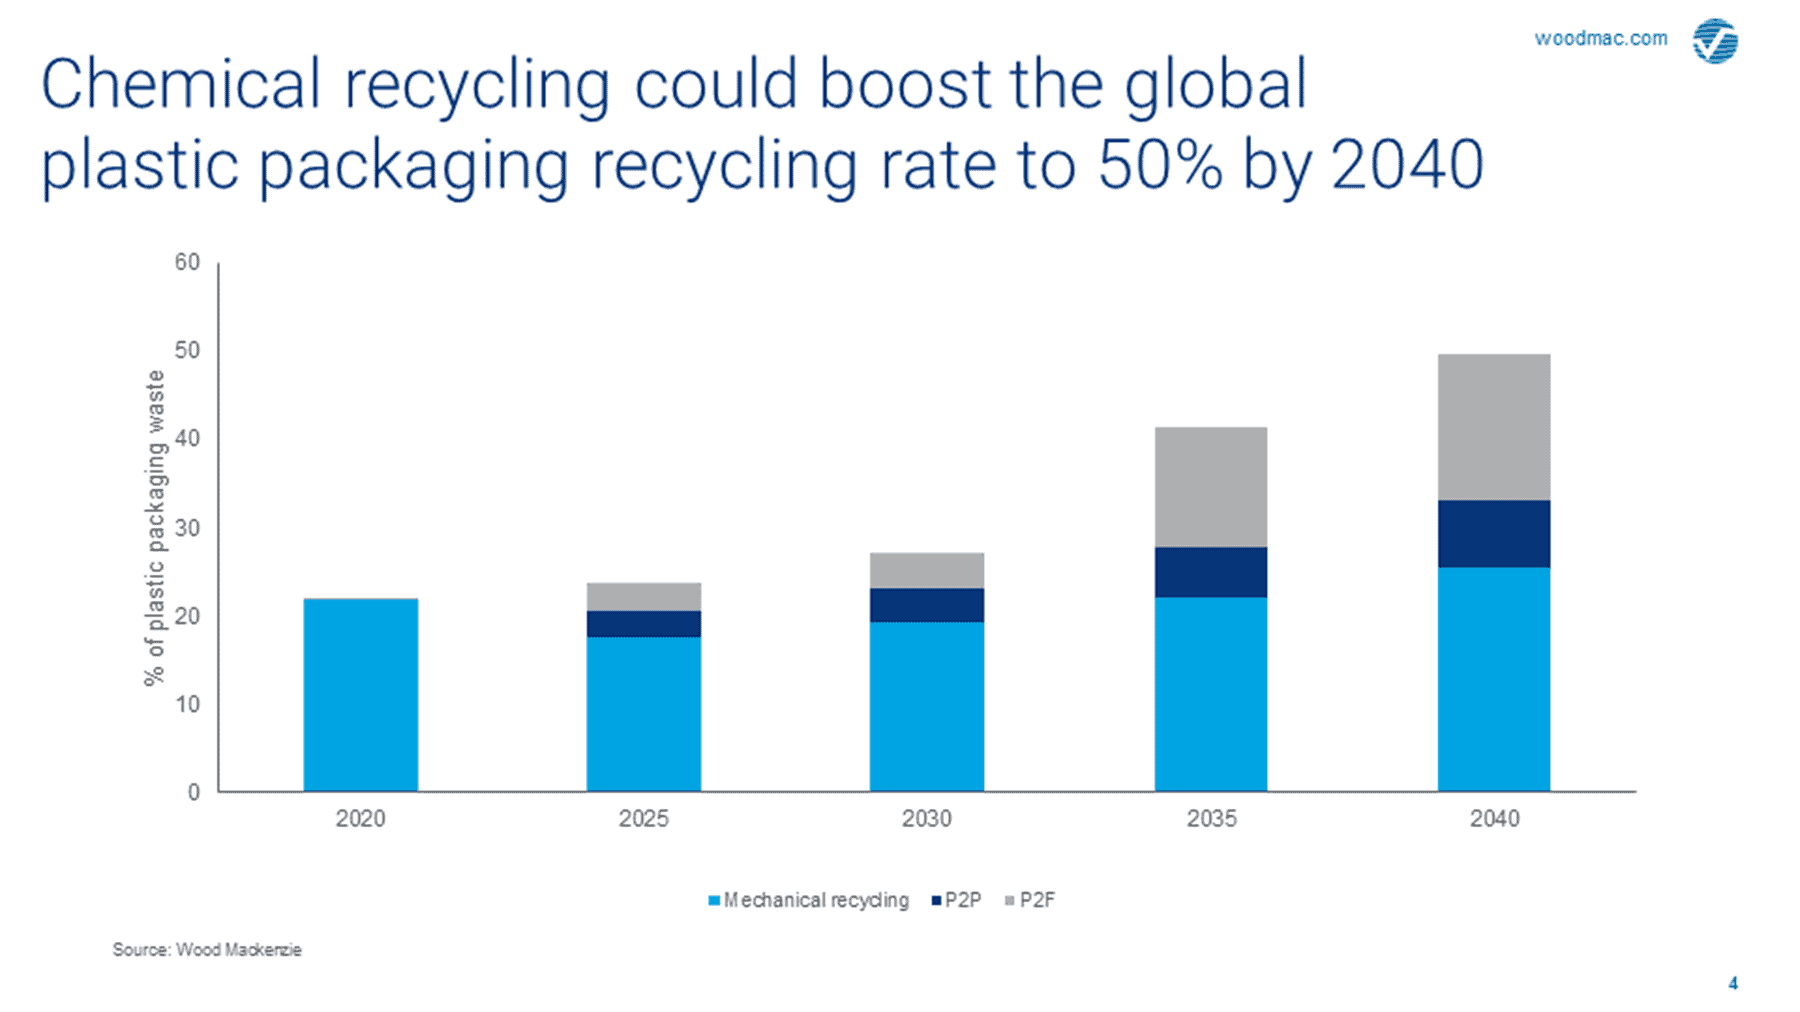 Chemical recycling could boost the global plastic packaging recycling rate to 50% by 2040